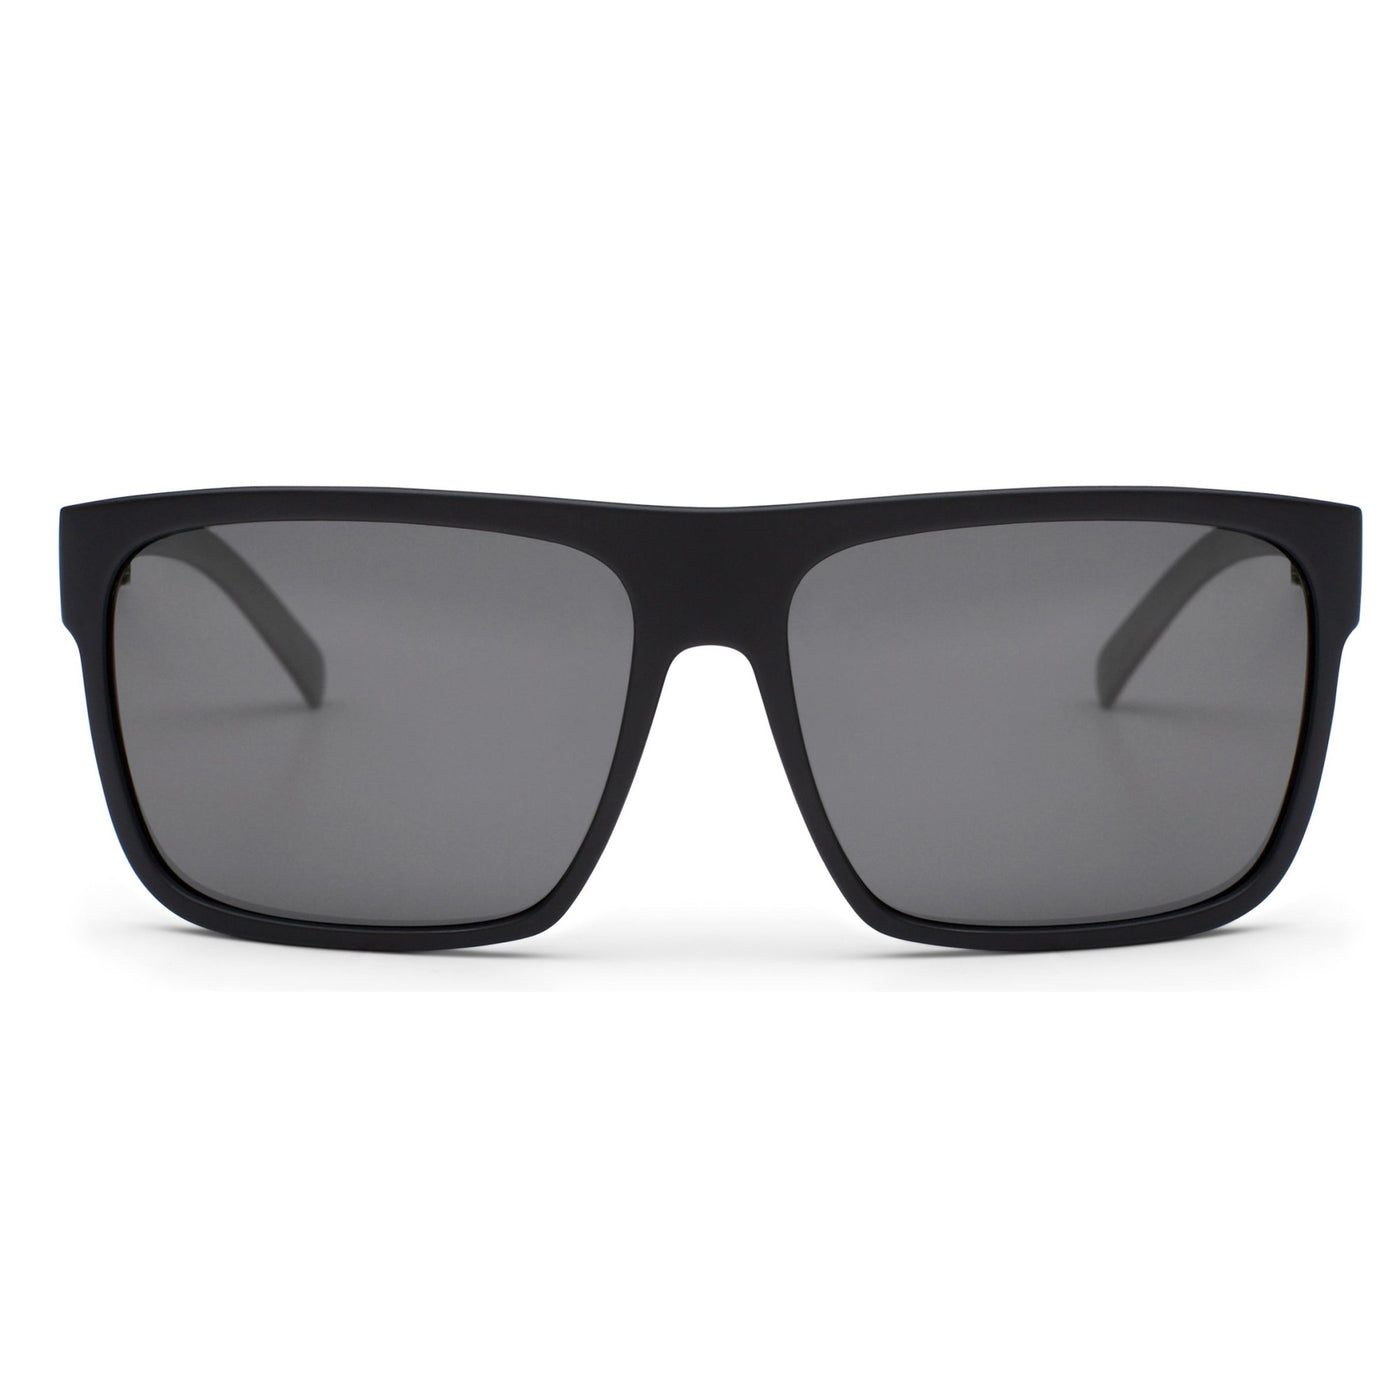 Black sunglasses facing the front